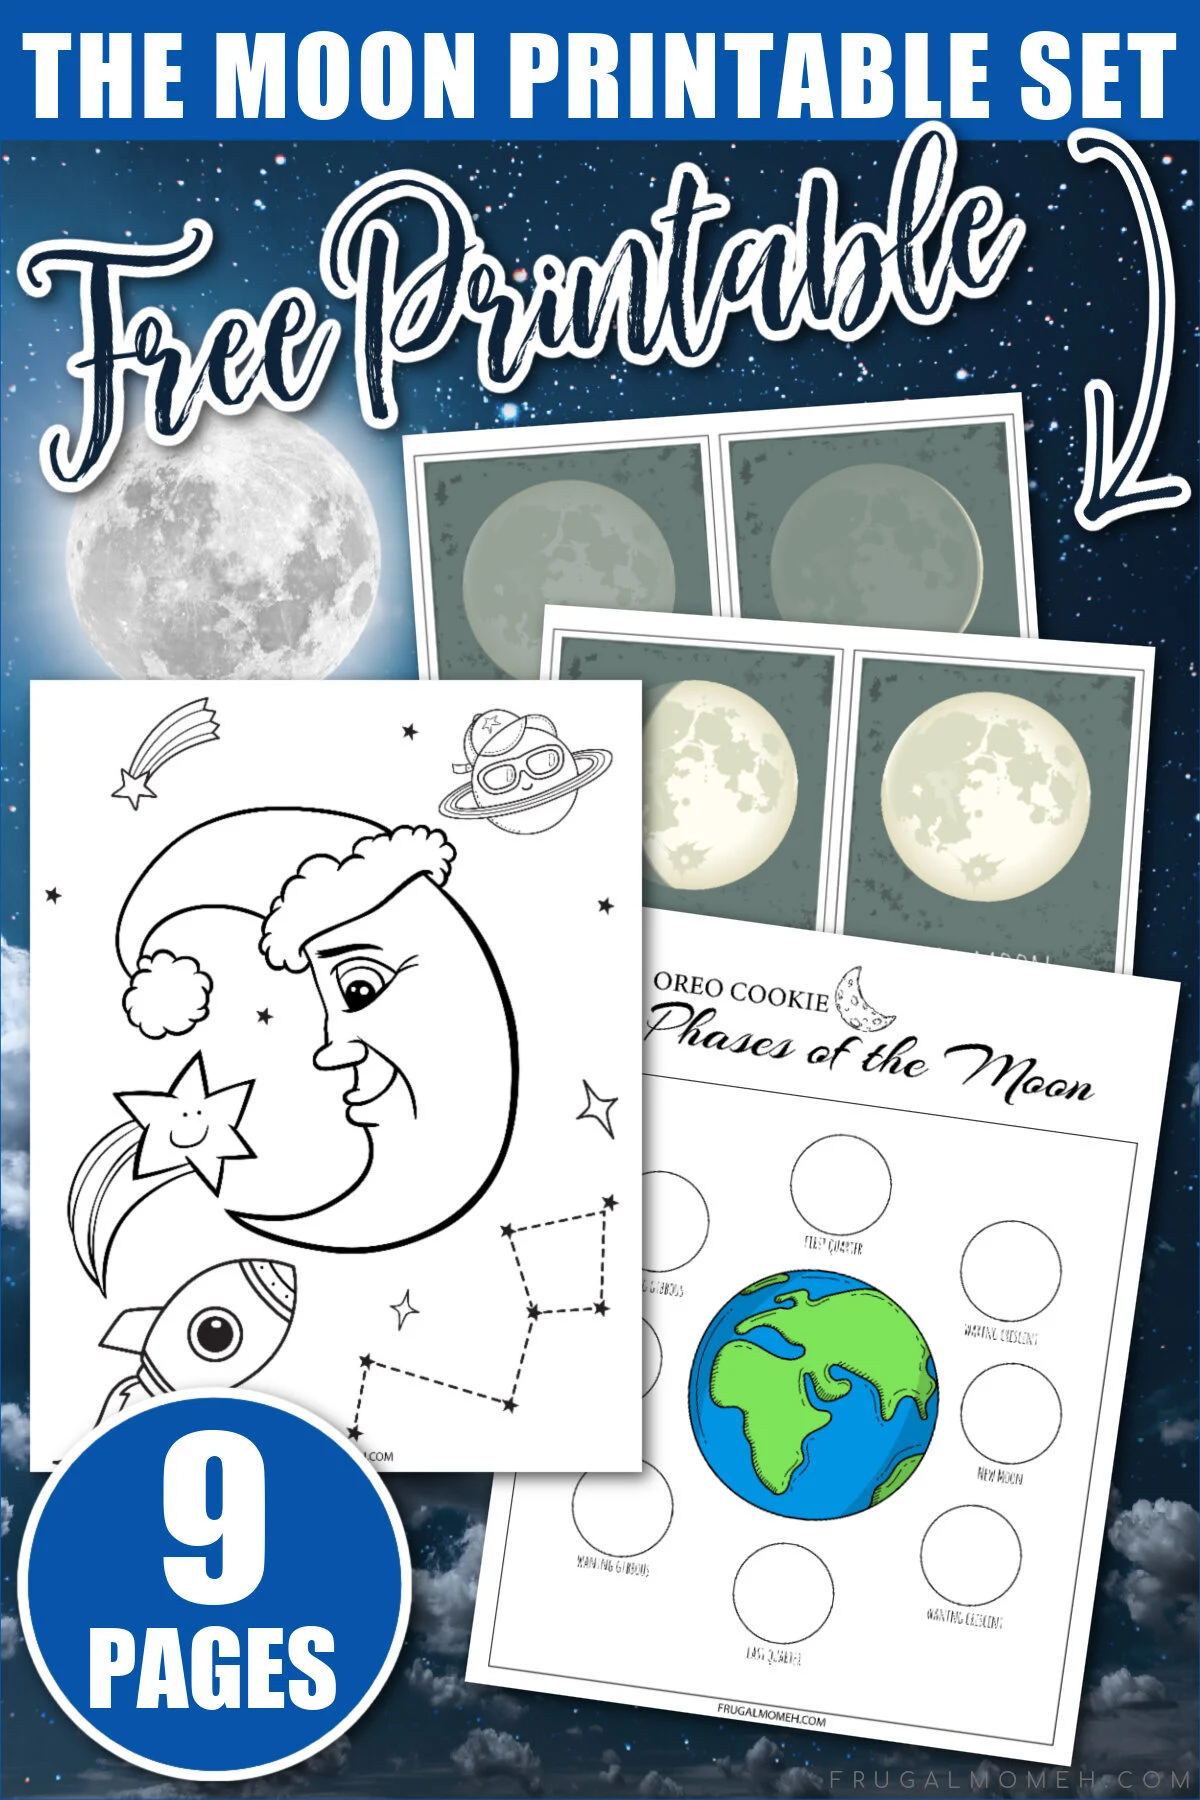 These free printable phases of the moon worksheets include moon phases cards, oreo phases of the moon, colouring pages and more!